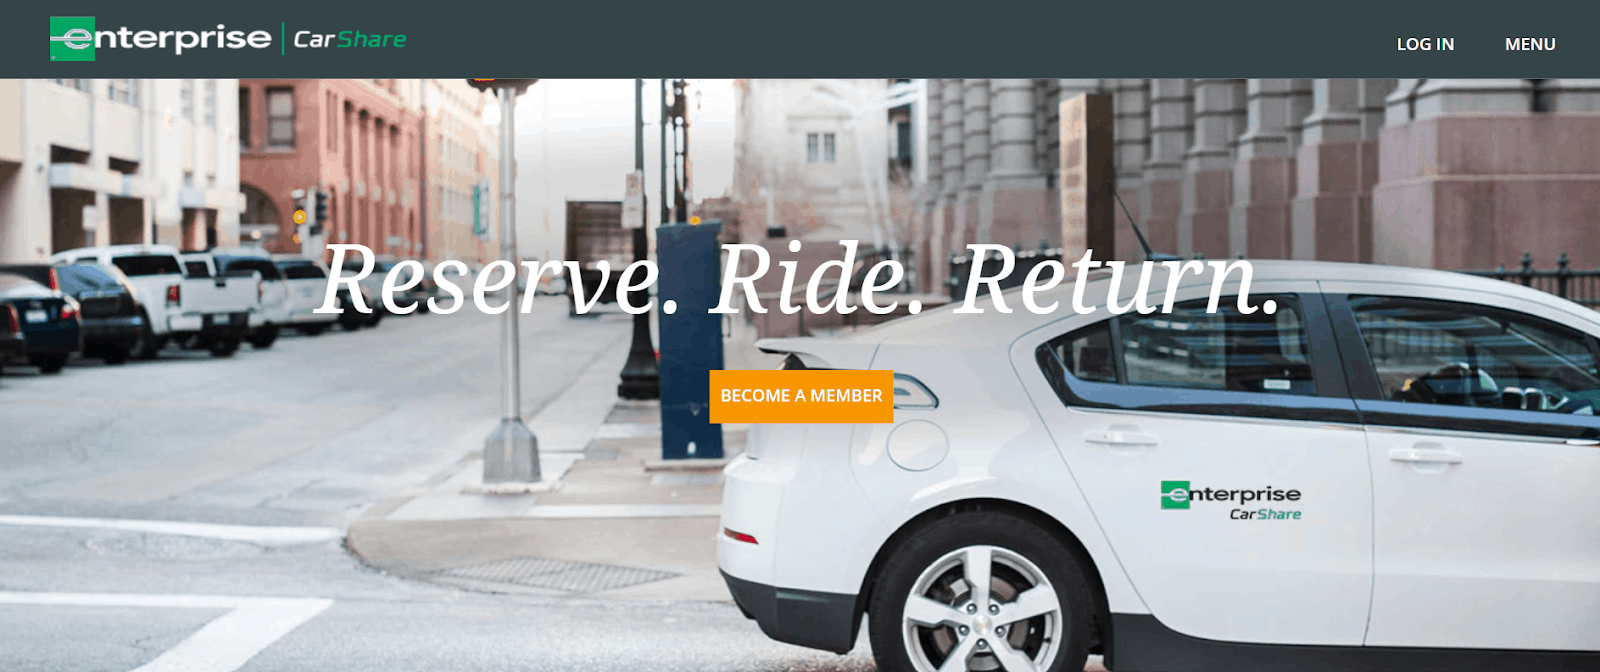 Car share: The Enterprise CarShare homepage